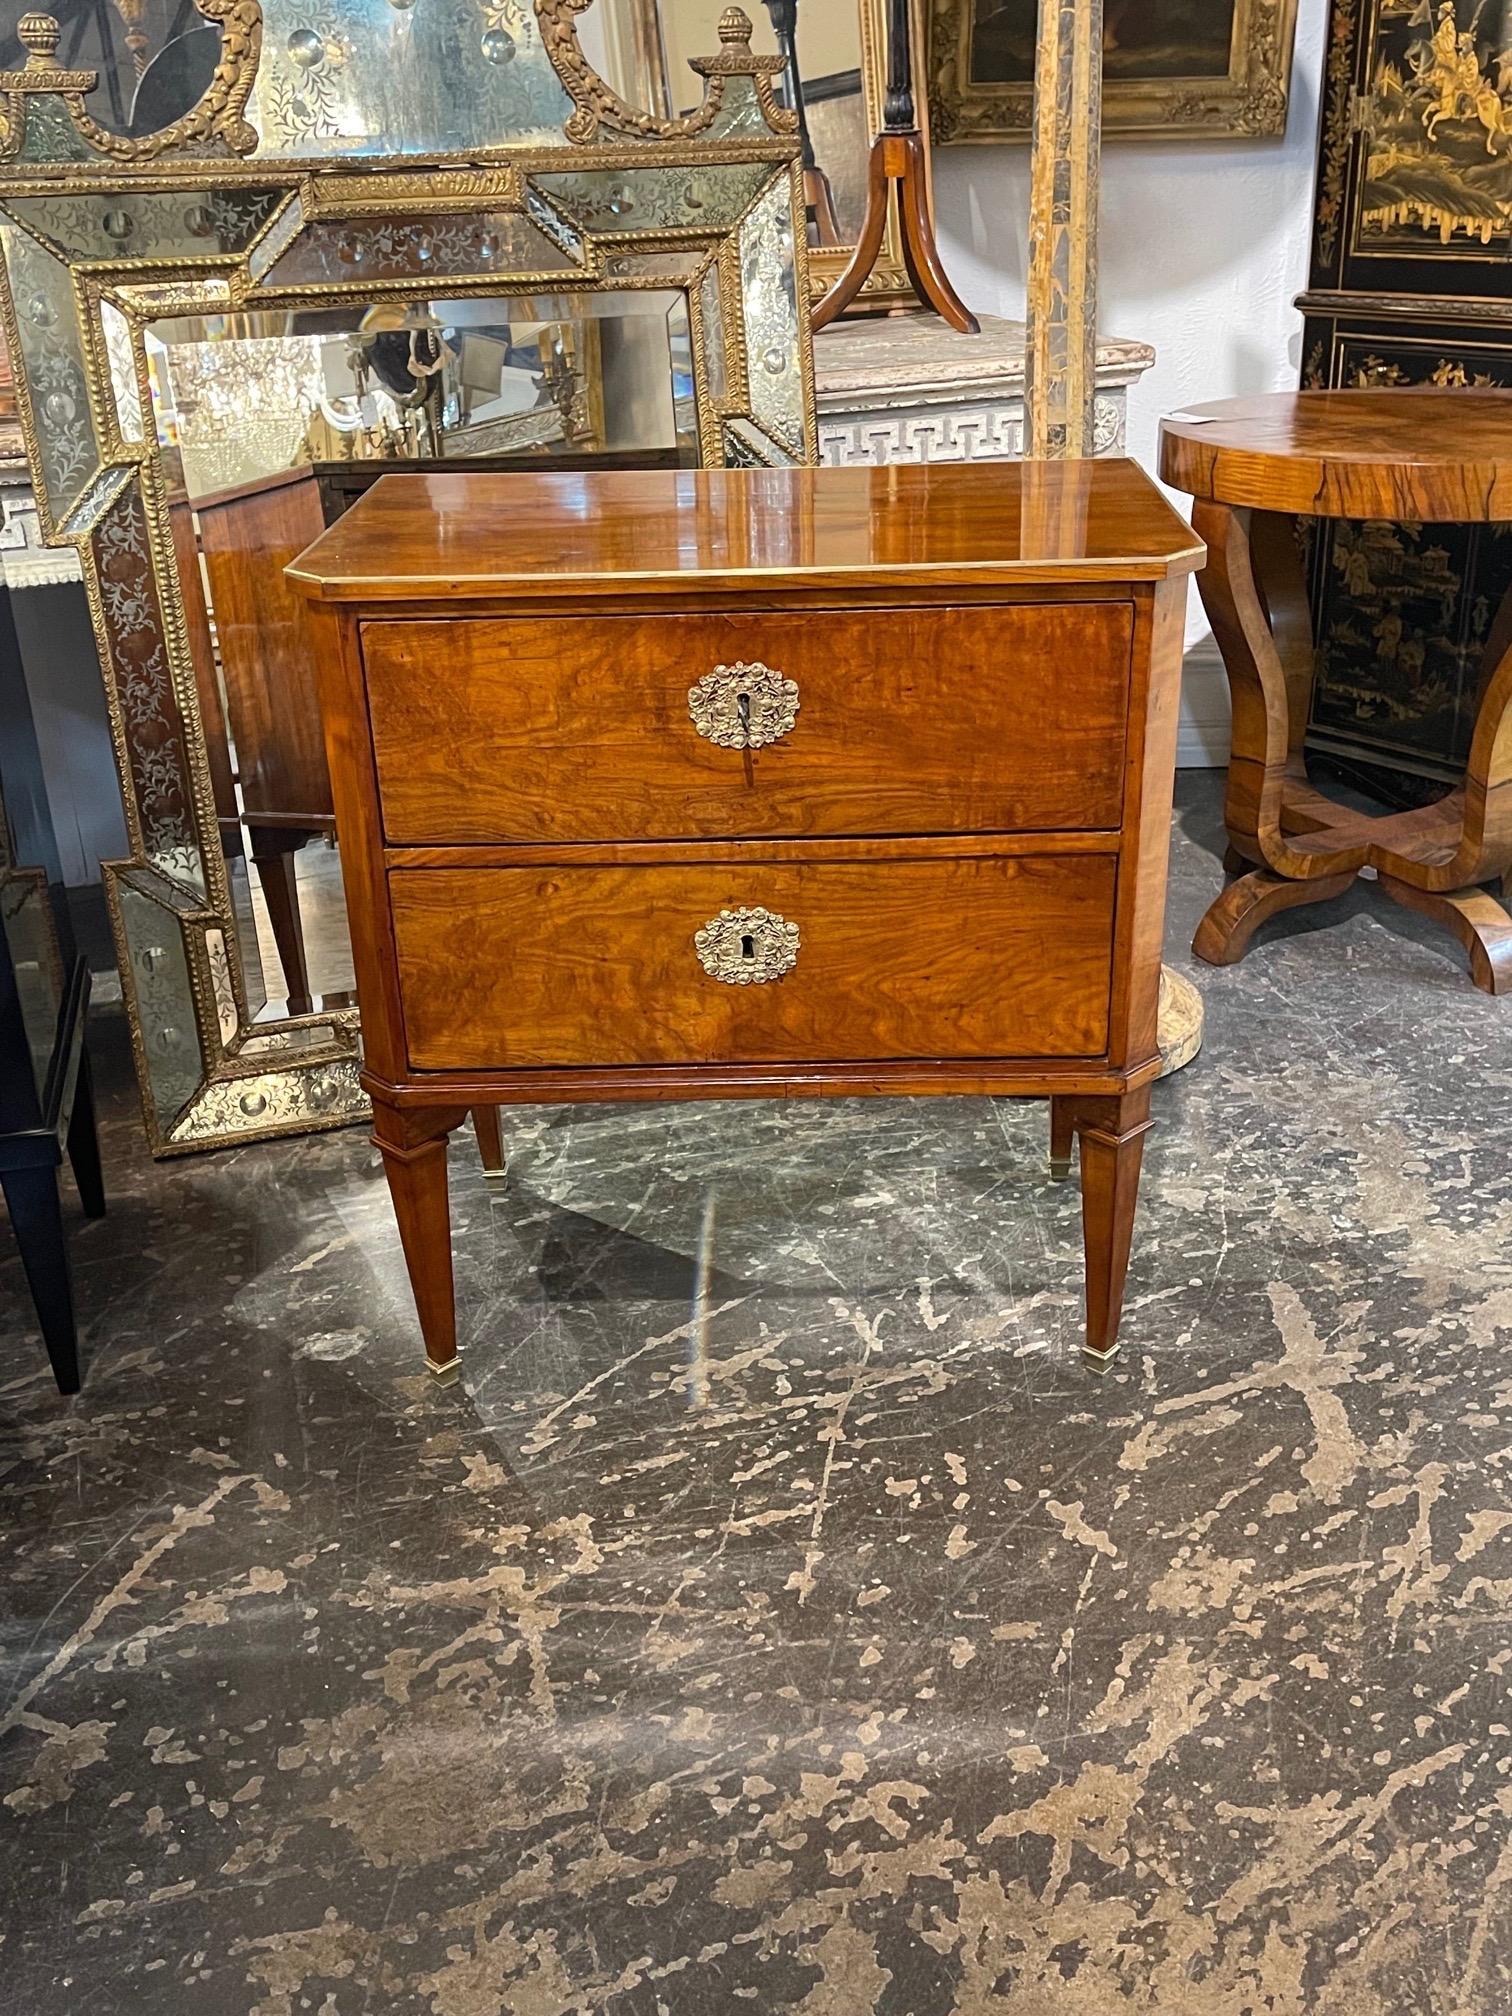 Exceptional early 19th century Austrian Biedermeier walnut and brass side table. Beautiful polished finish and very nice brass details. A classic and stylish piece that adds a real touch of class!